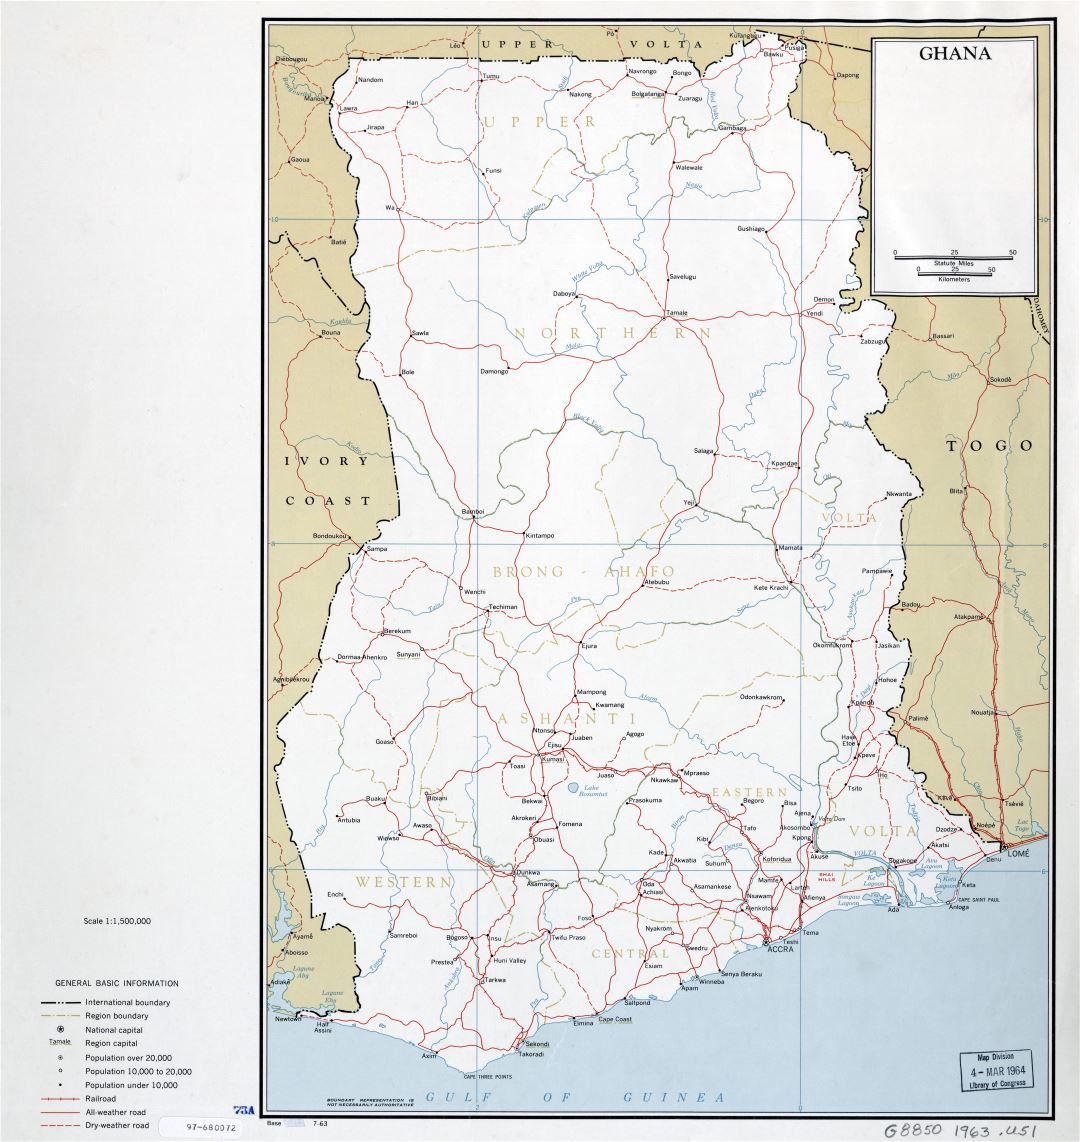 Large scale detailed political and administrative map of Ghana with roads, railroads and cities - 1963